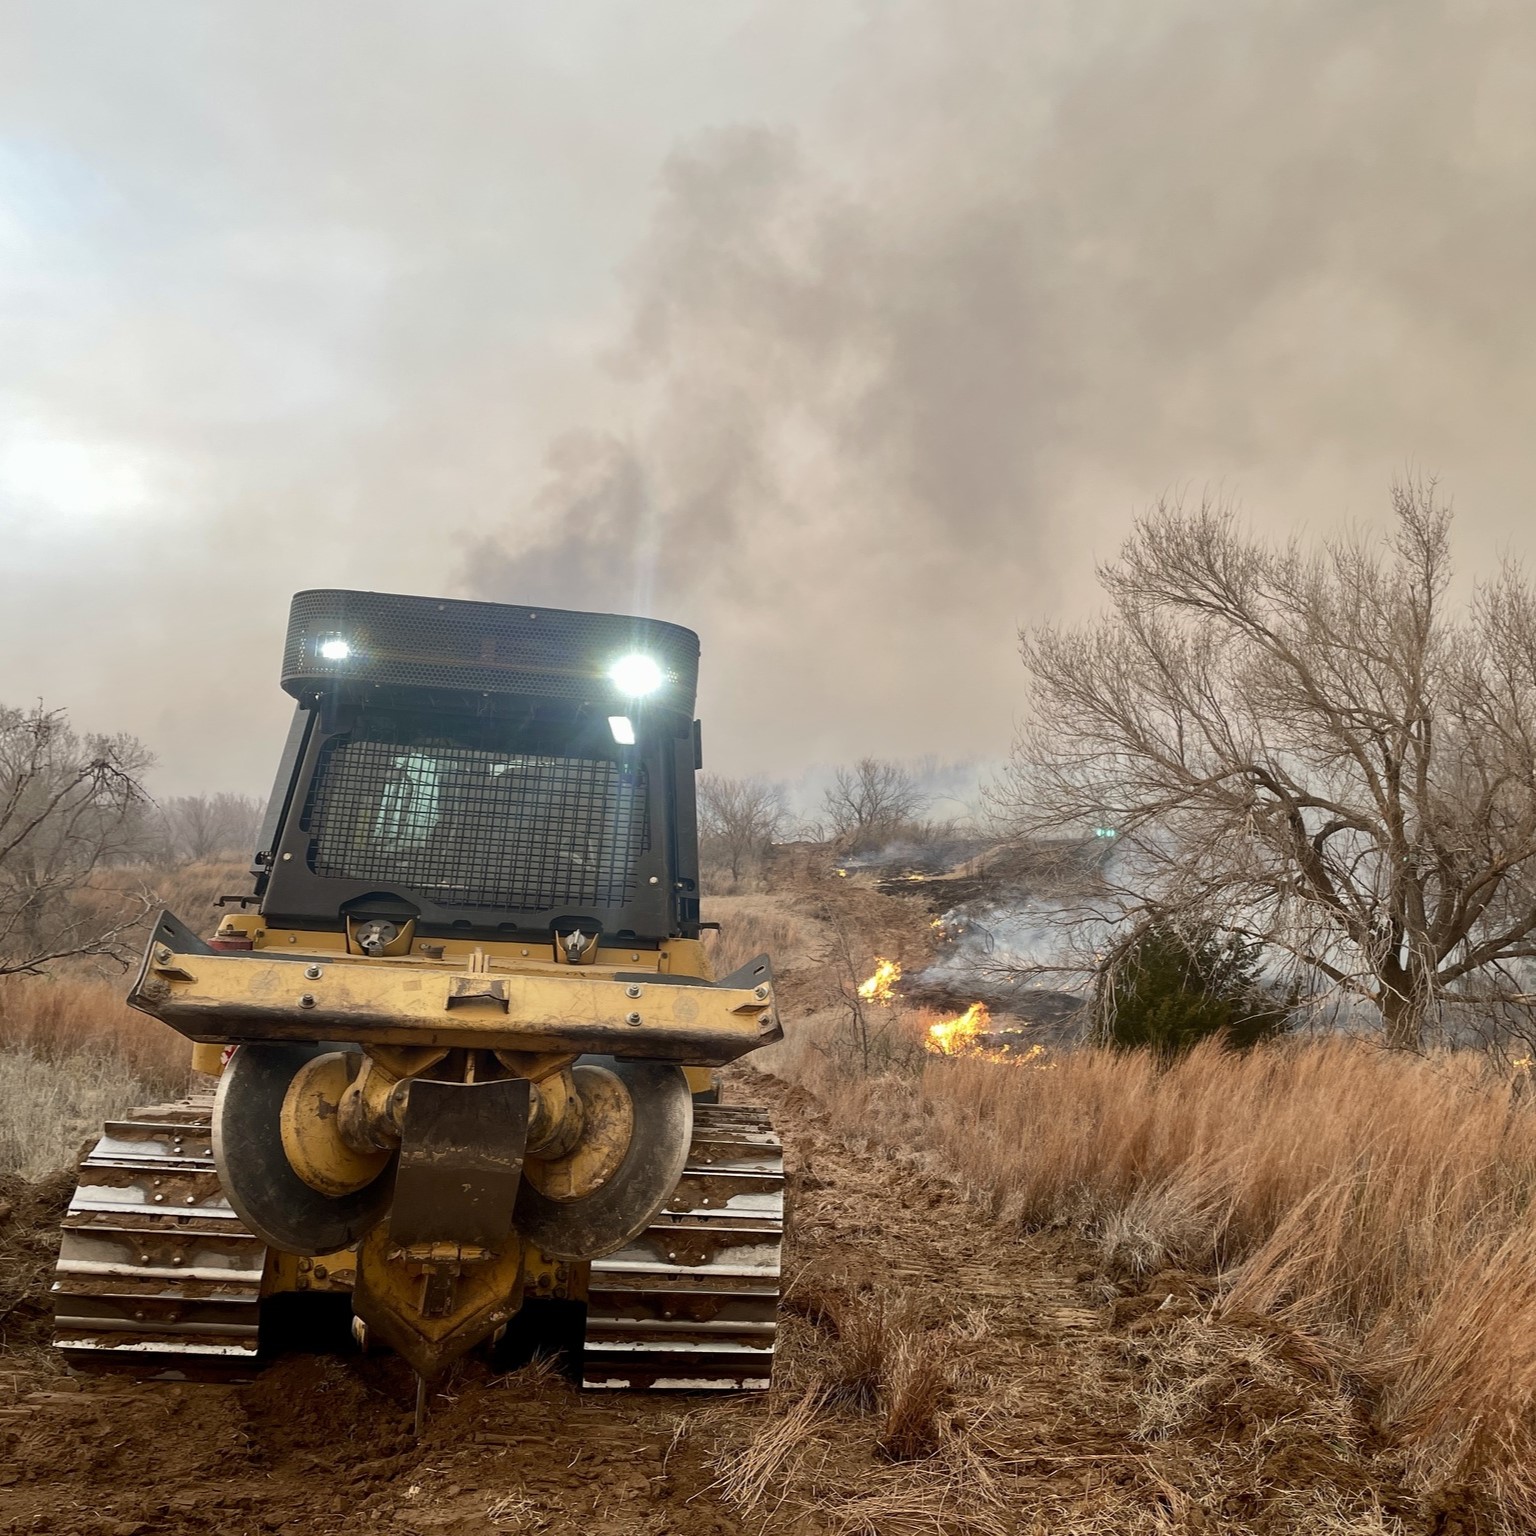 <p> The largest wildfire in Texas history is actively burning today. The Smokehouse Creek Fire in Hutchinson County is burning a total of 1,075,000 acres across Texas and Oklahoma and is 3% contained.</p>